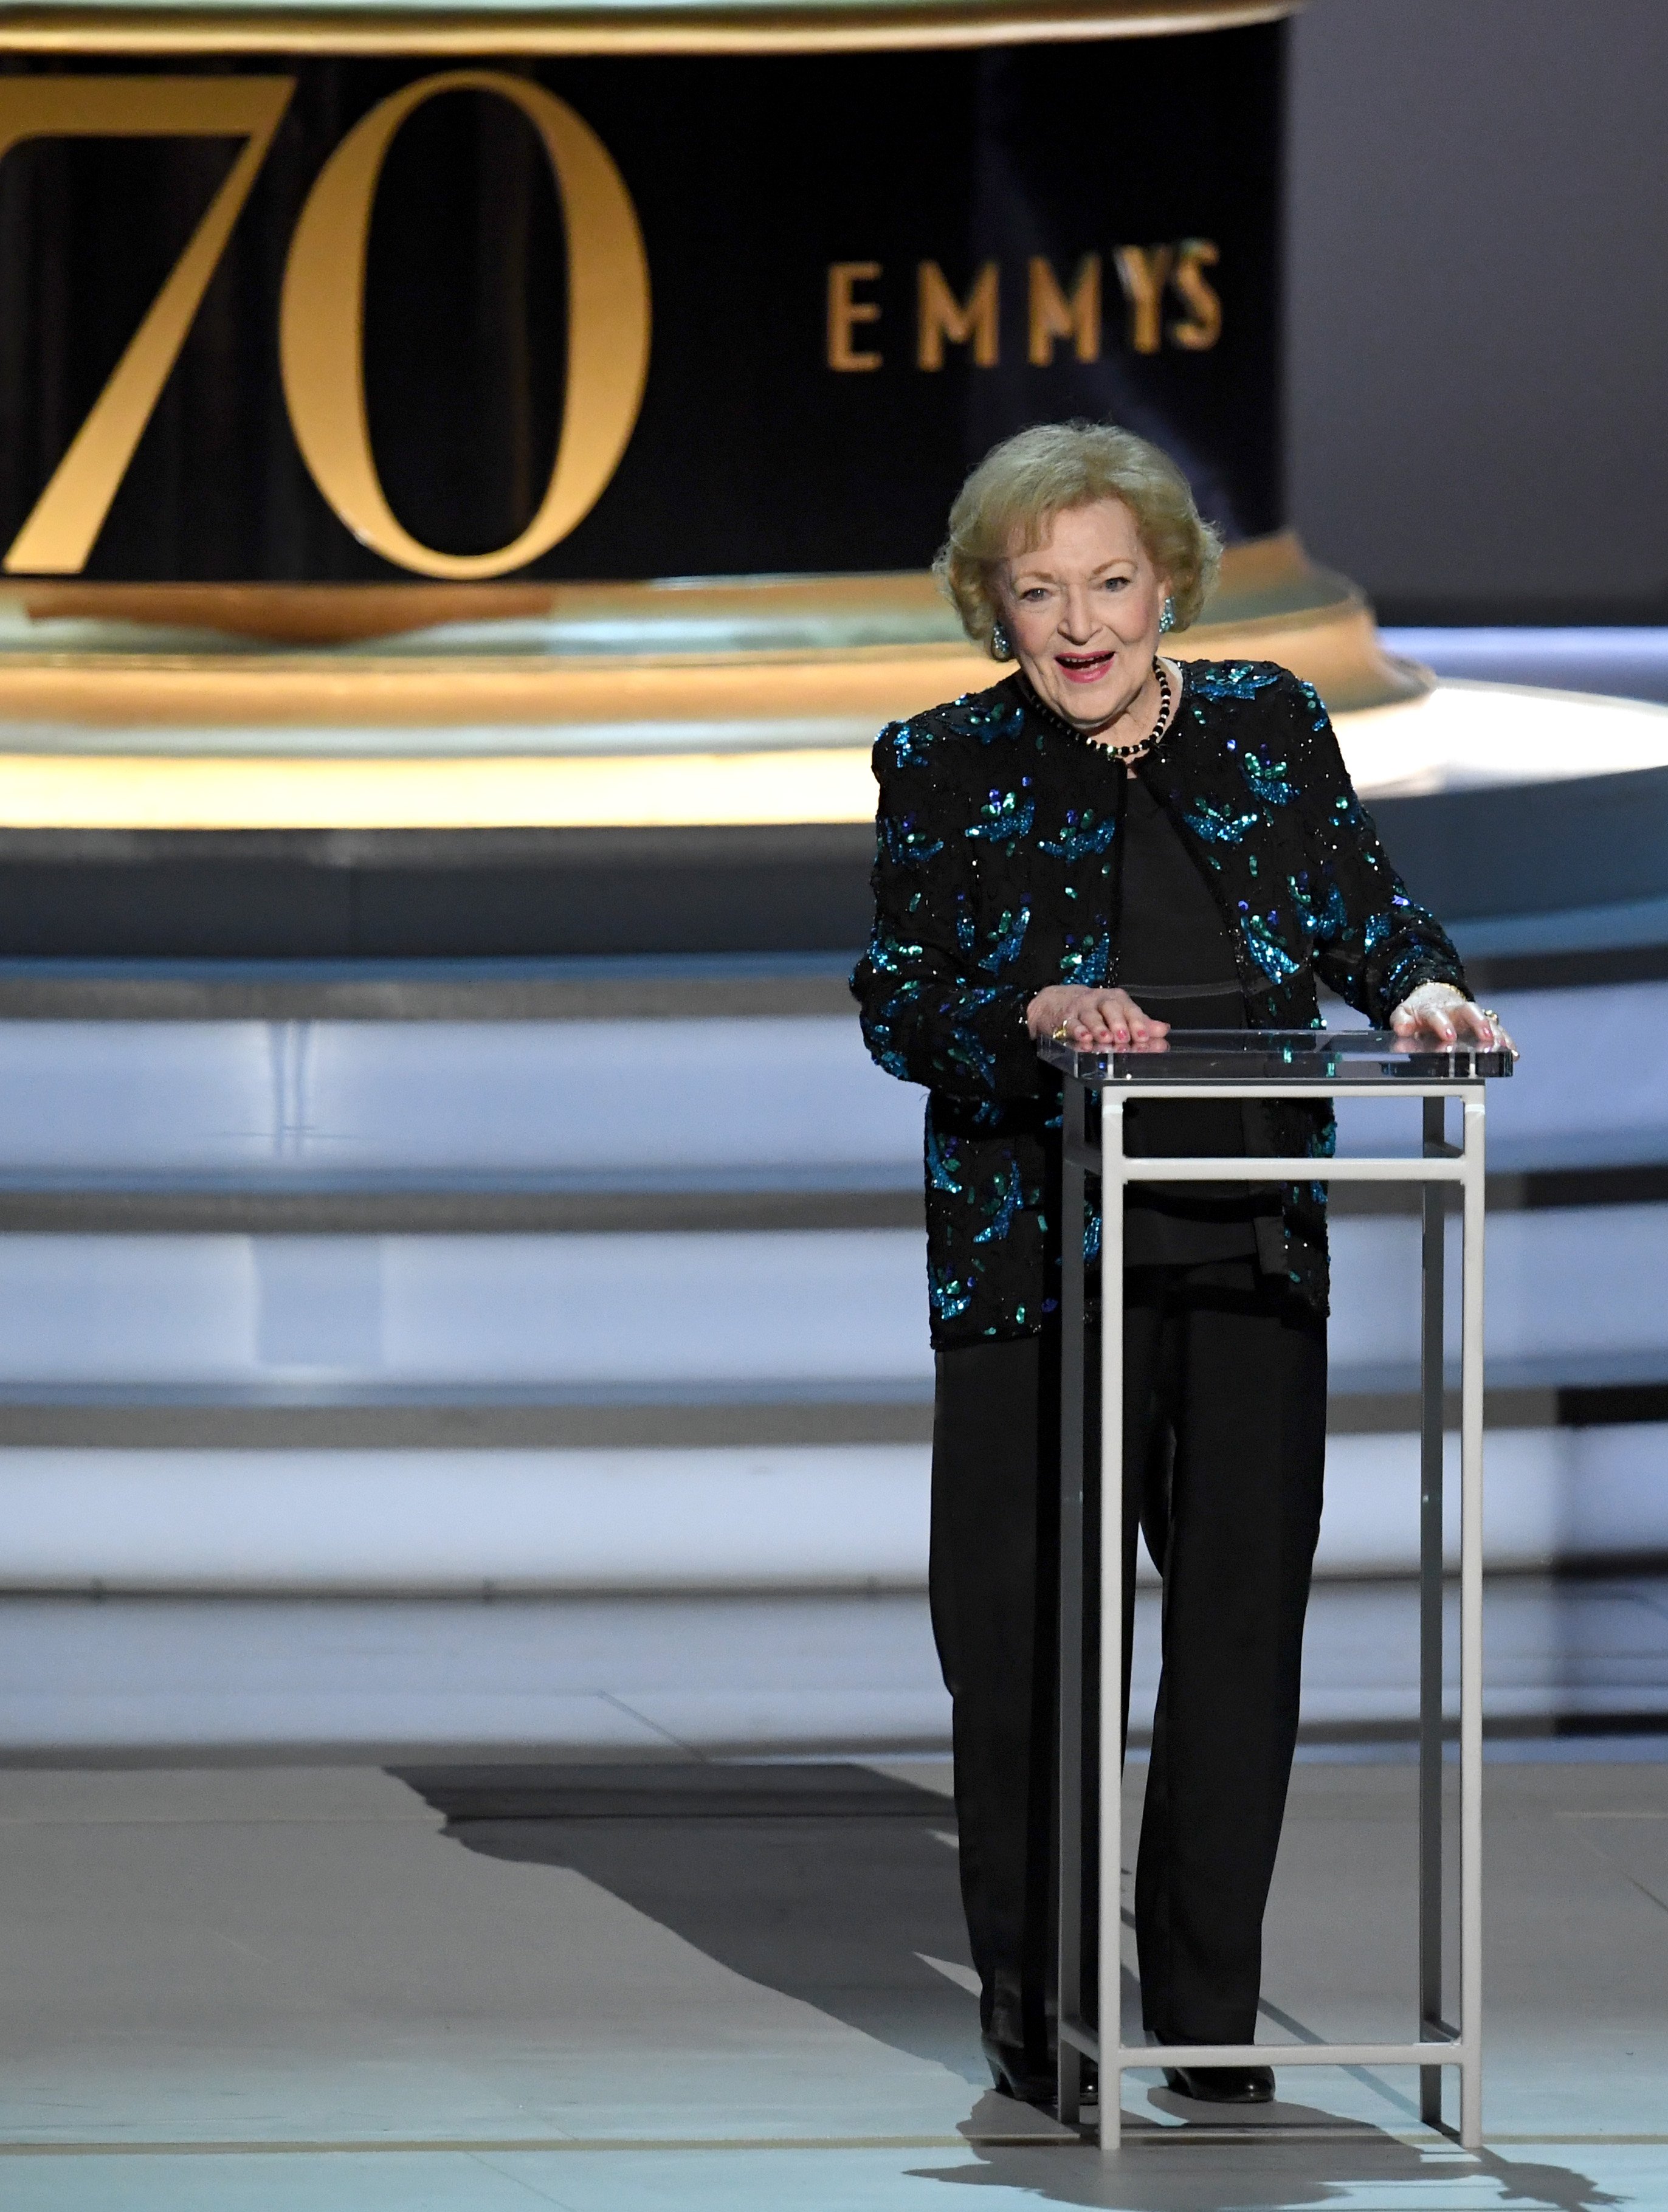 Betty White onstage during the 70th Emmy Awards on September 17, 2018, California. | Source: Getty Images